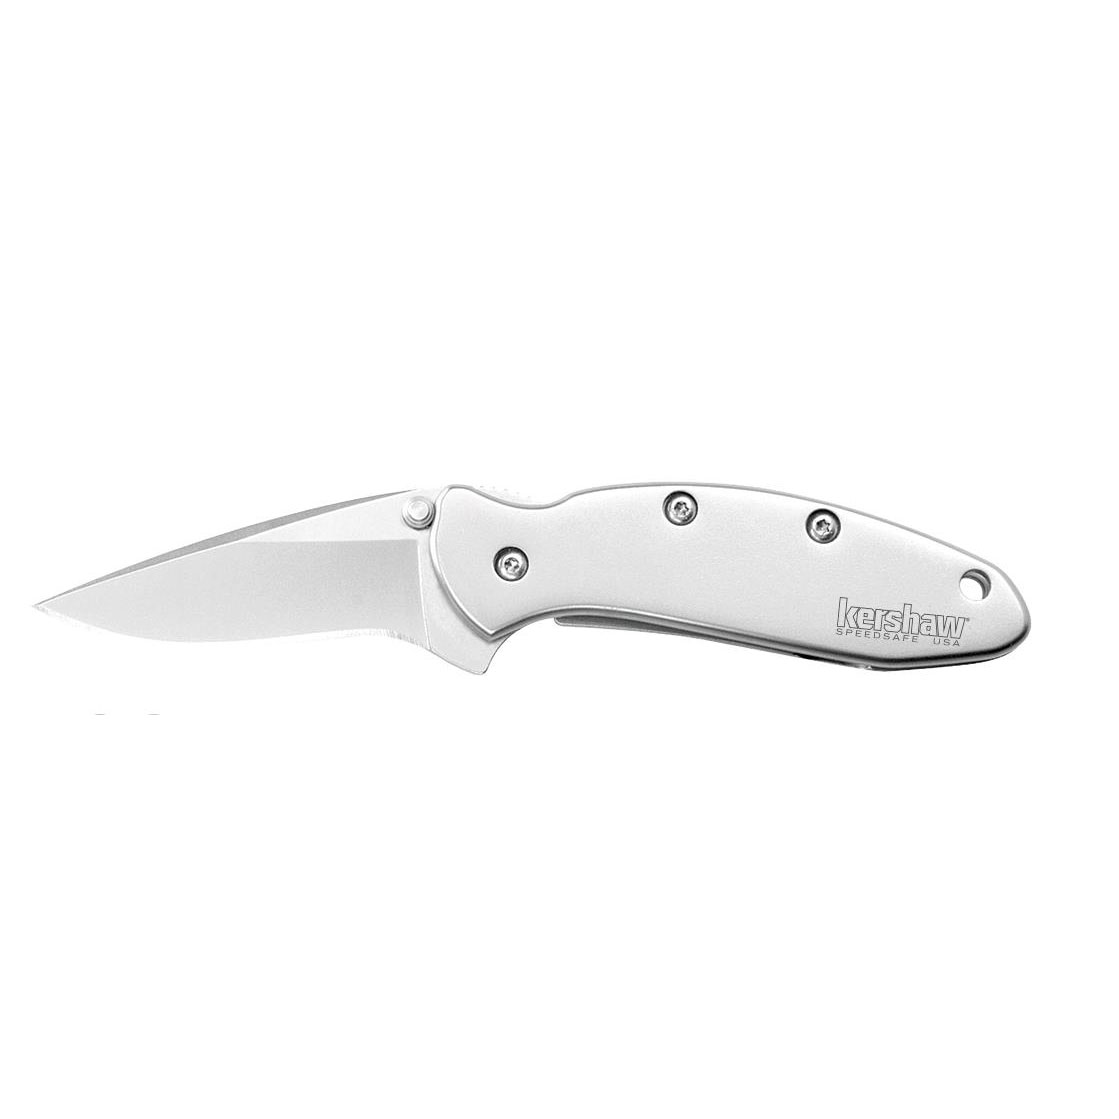 Kershaw 1600 Chive Folding Pocket Knife with SpeedSafe, Stainless Steel ...